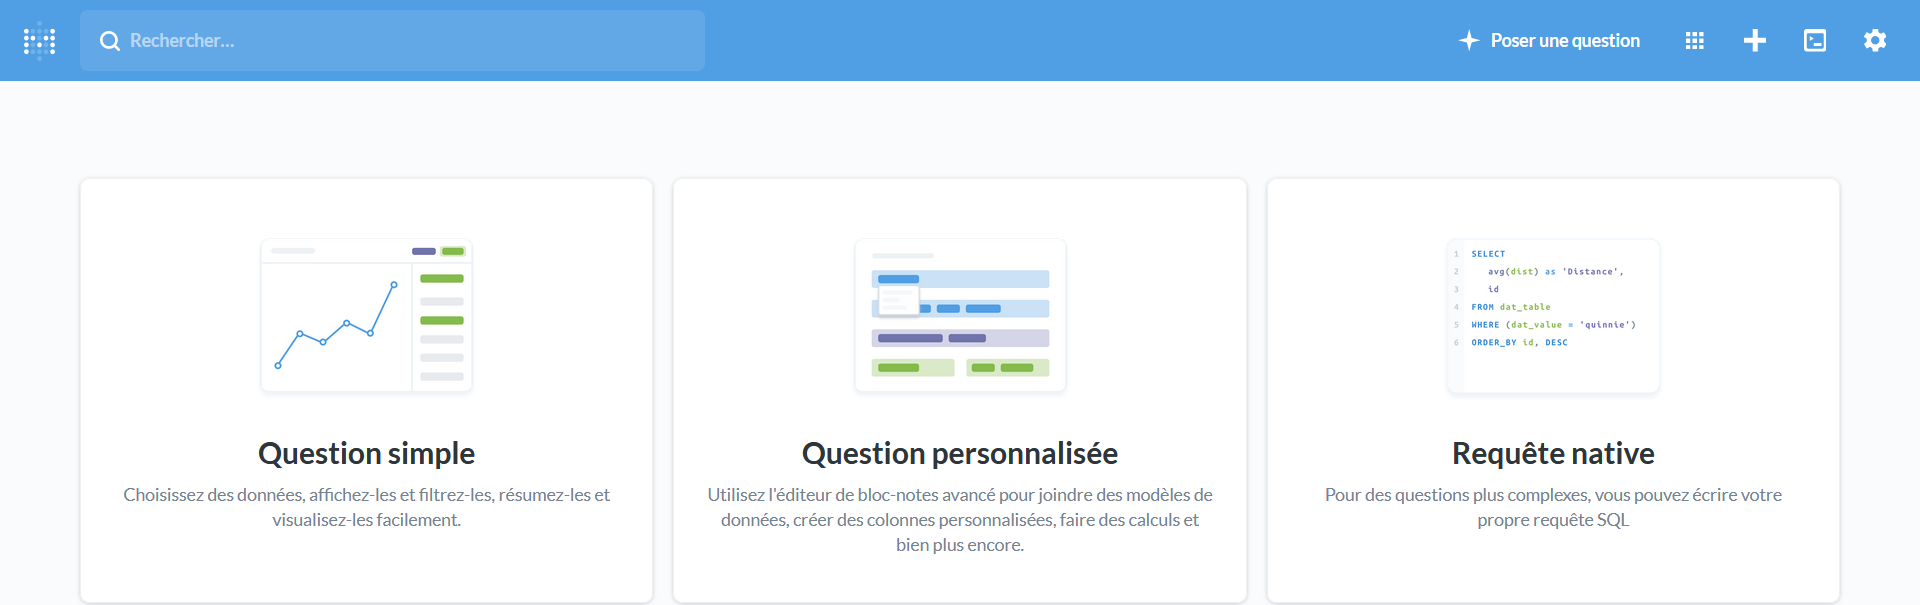 Interface Metabase - Poser une question